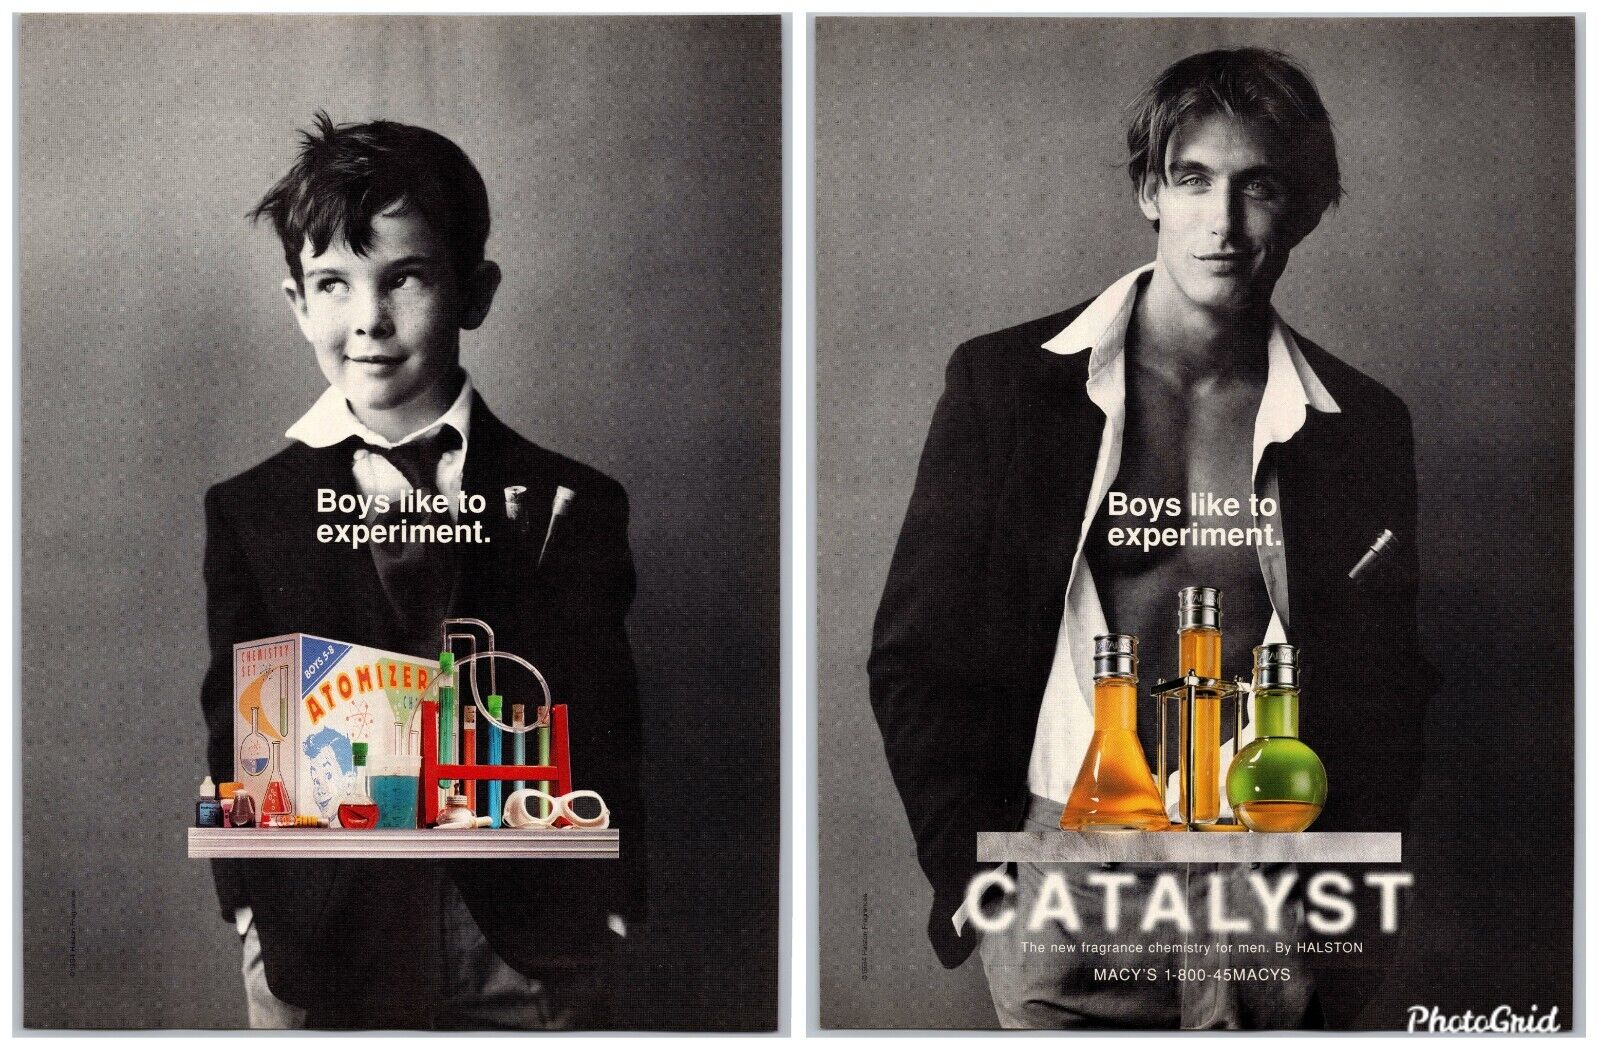 Catalyst By Halston Fragrance Chemistry For Men Oct, 1994 Full 2 Page Print Ad